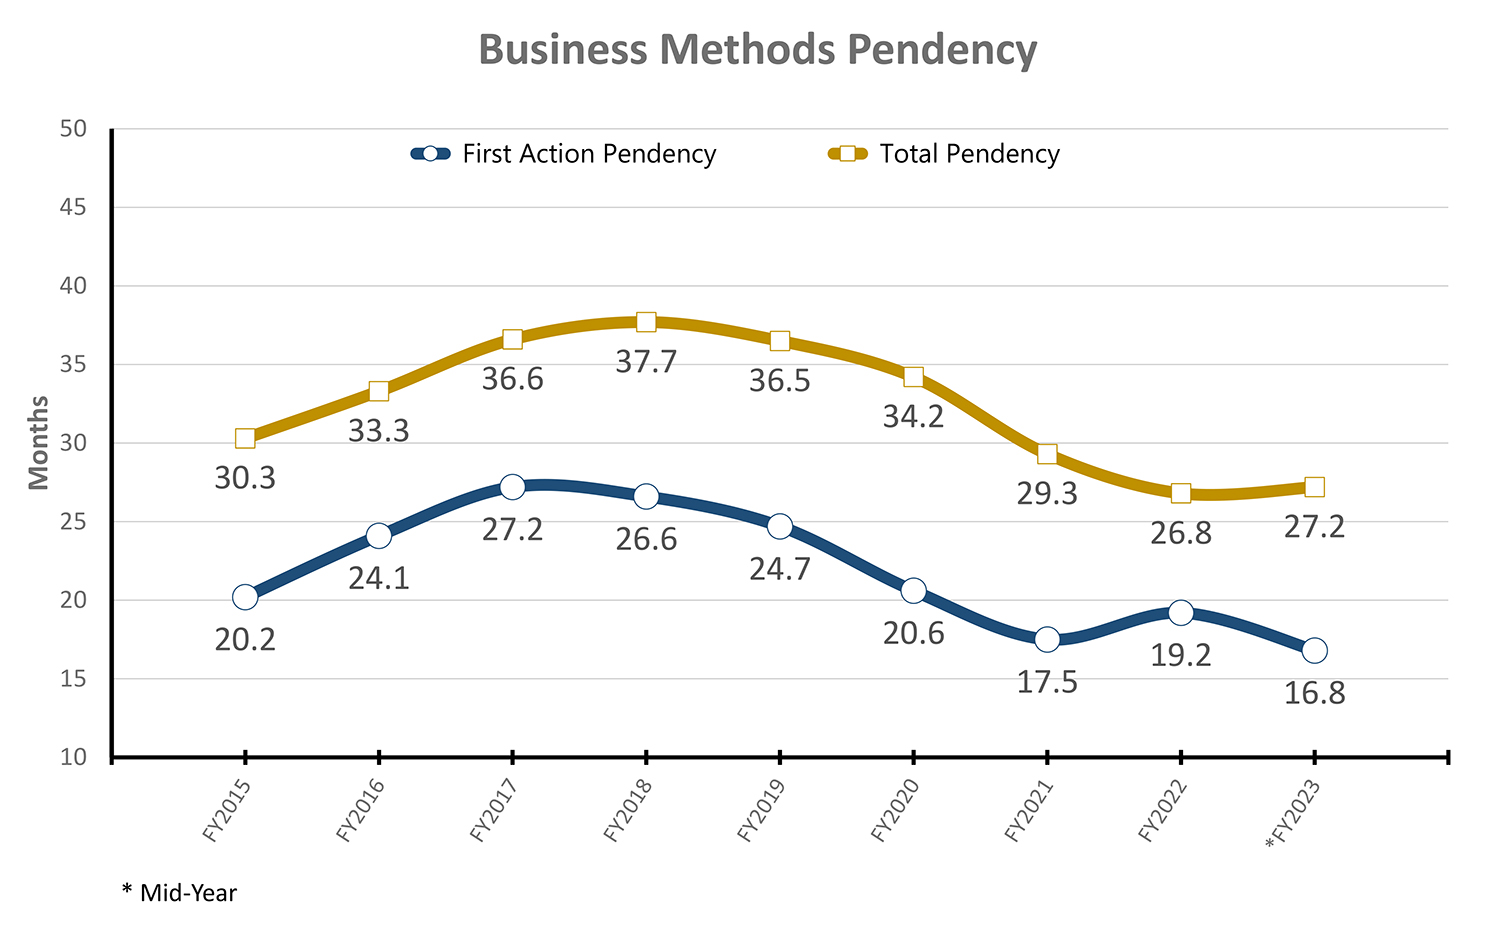 This chart shows the first action and total pendency in the Business Methods area from fiscal year (FY) 2015 to mid-year FY 2023. Overall, pendency has gone down since FY 2018. The first action pendency is down to 16.8 months at mid-year FY 2023 and total pendency is down to 27.2 months at mid-year FY 2023.